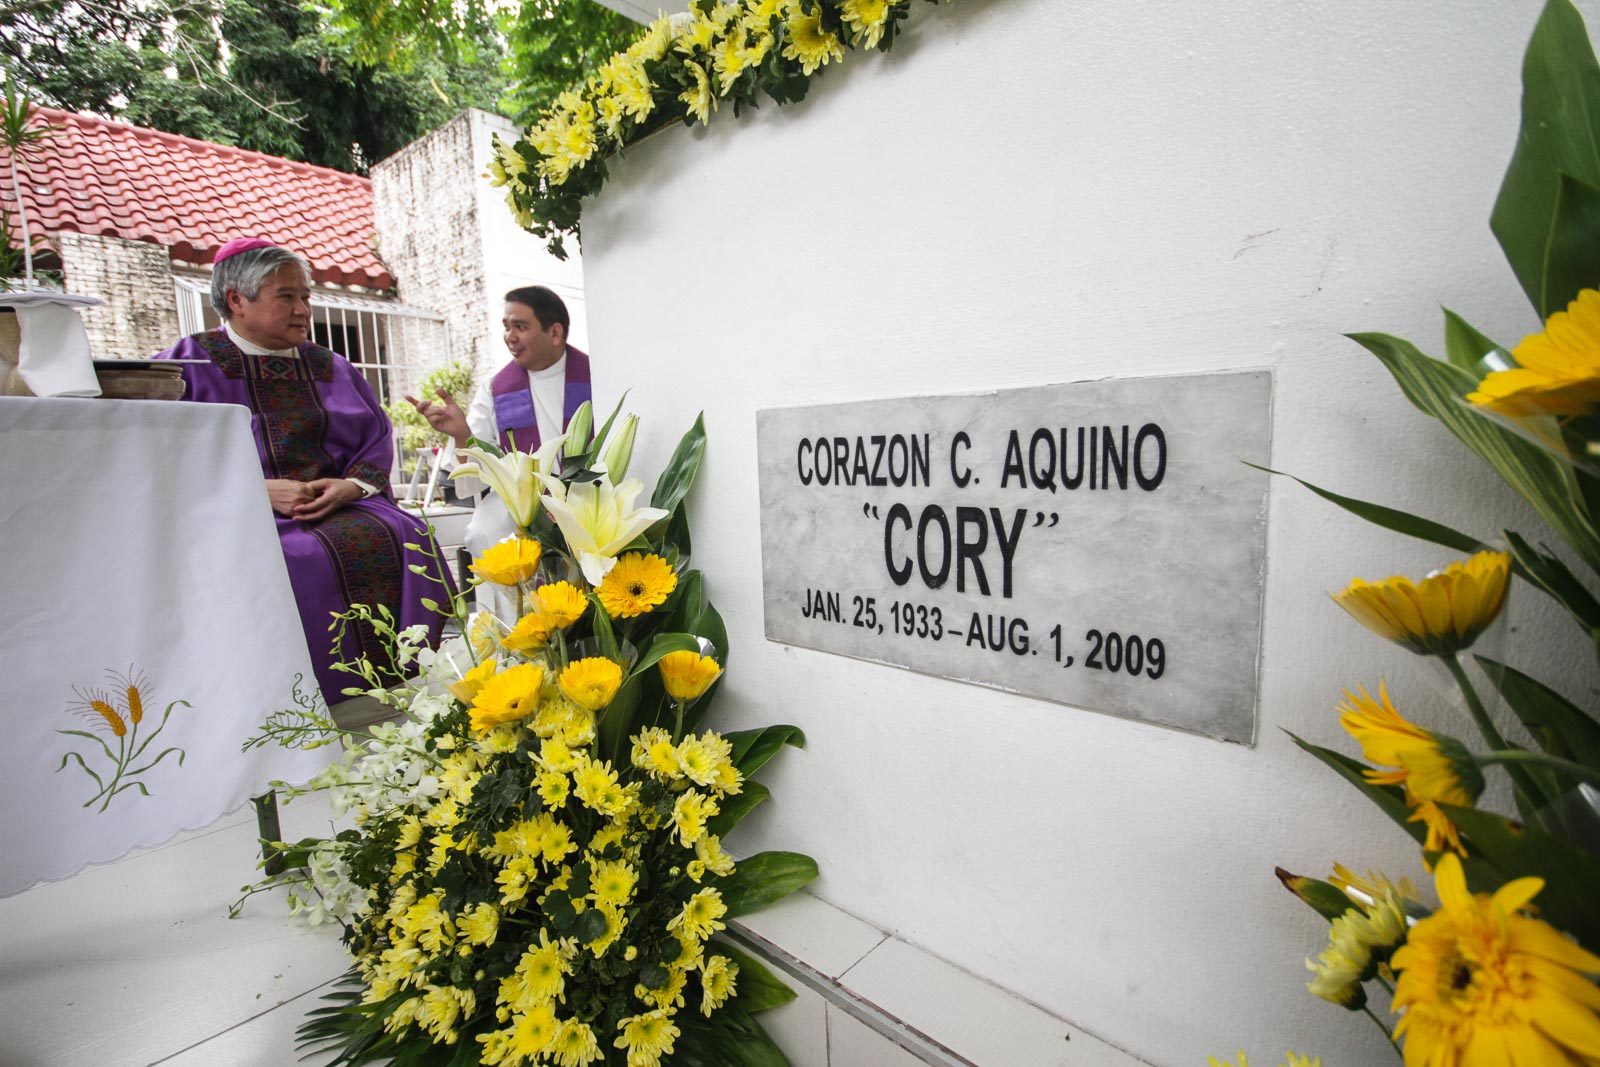 Duterte criticizes Cory legacy a day after her death anniversary